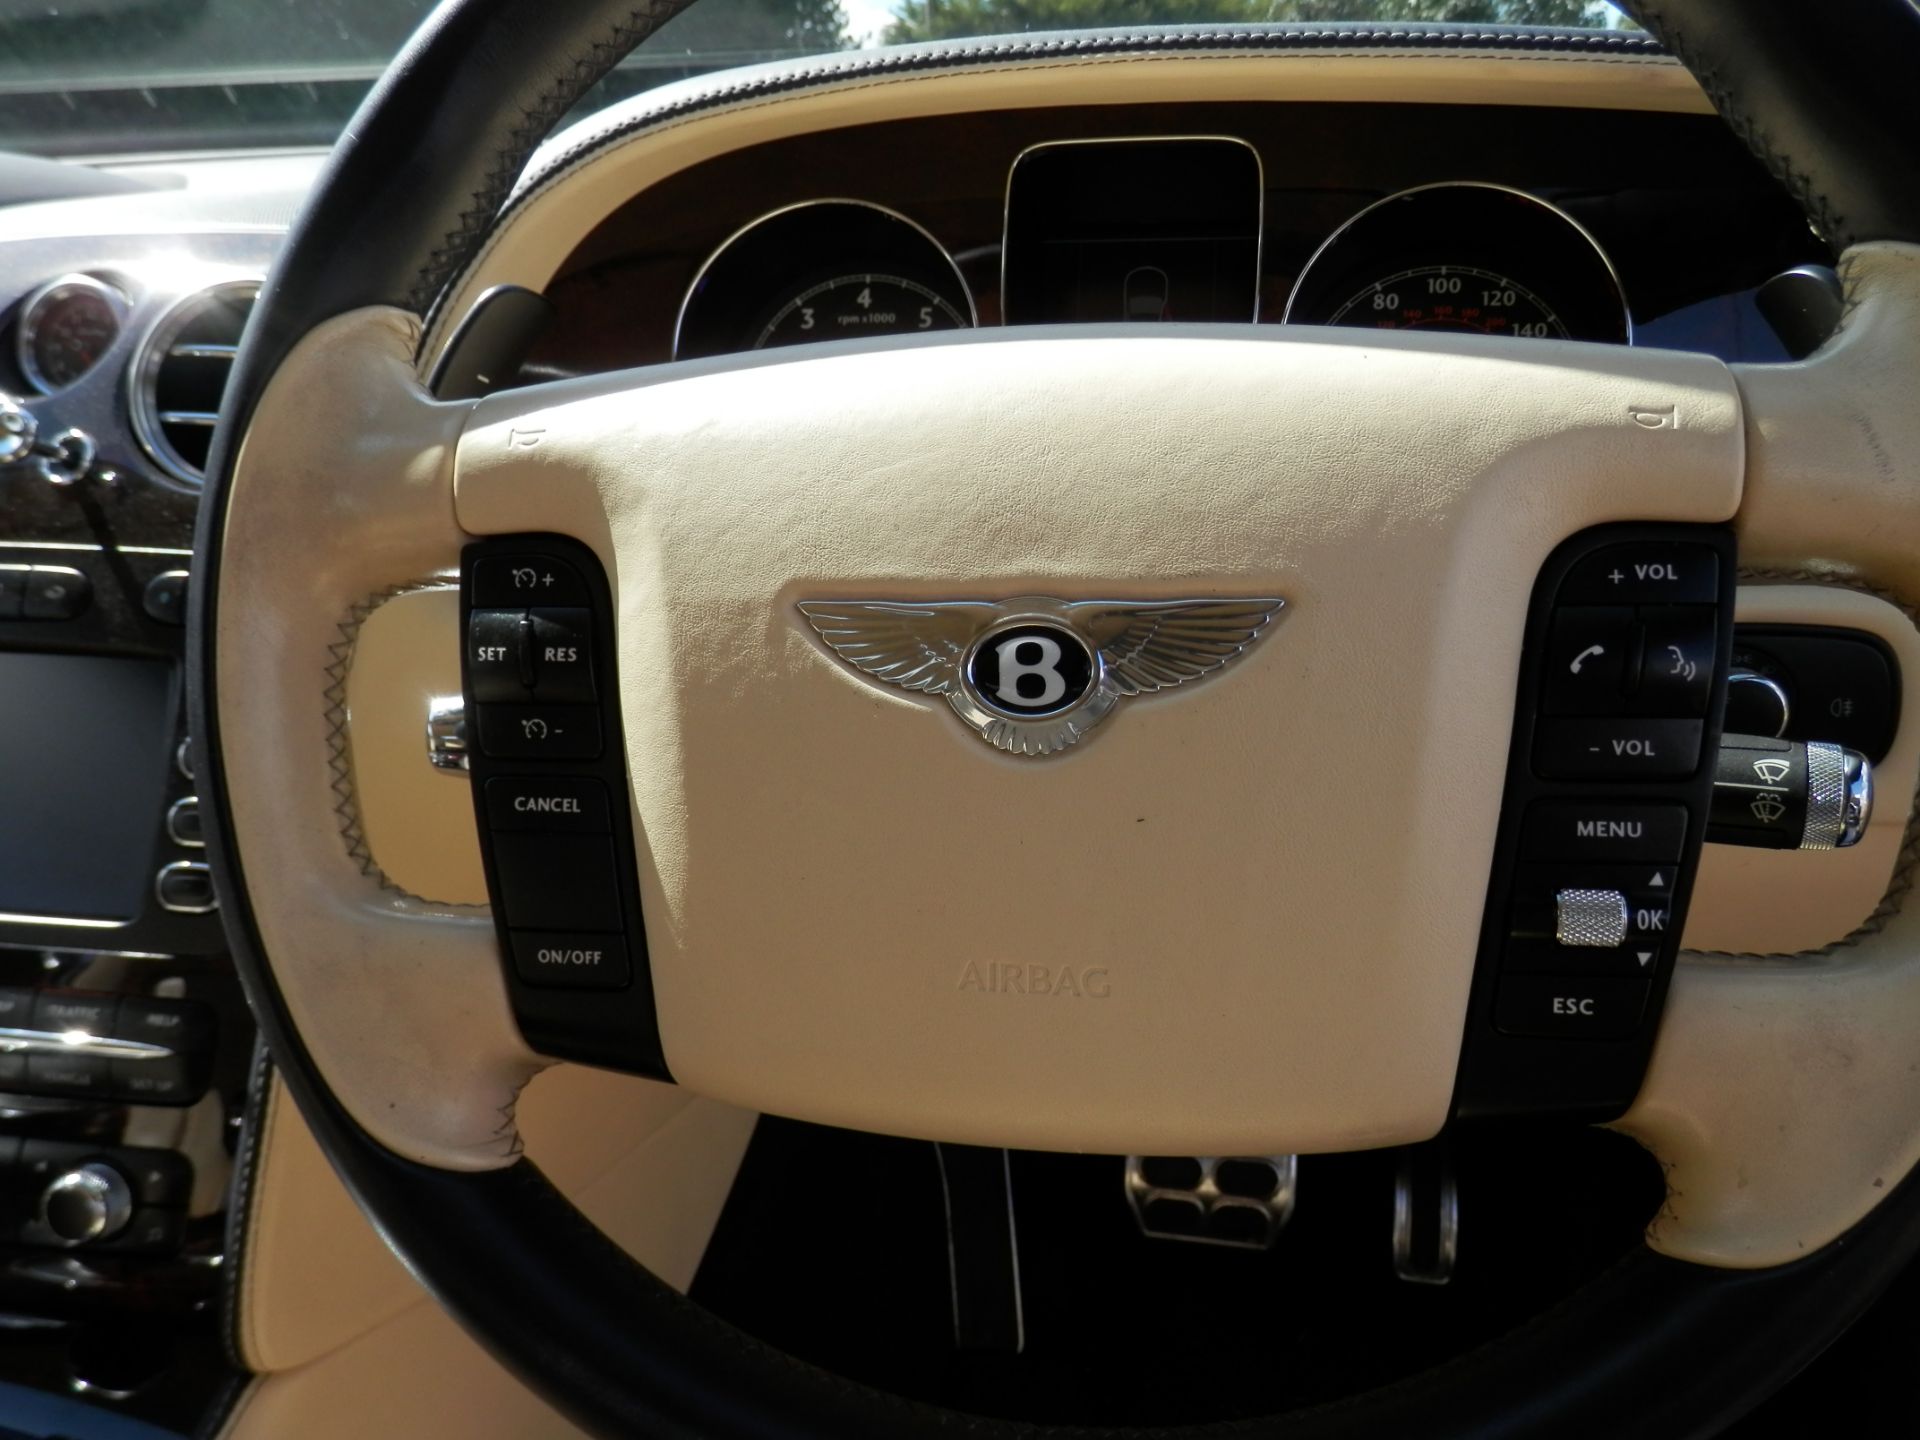 STUNNING 2007 BENTLEY GT CONTINENTAL, 6.0L TWIN TURBO,35K MILES, BLUE, CREAM LEATHER, FULL HISTORY. - Image 14 of 53